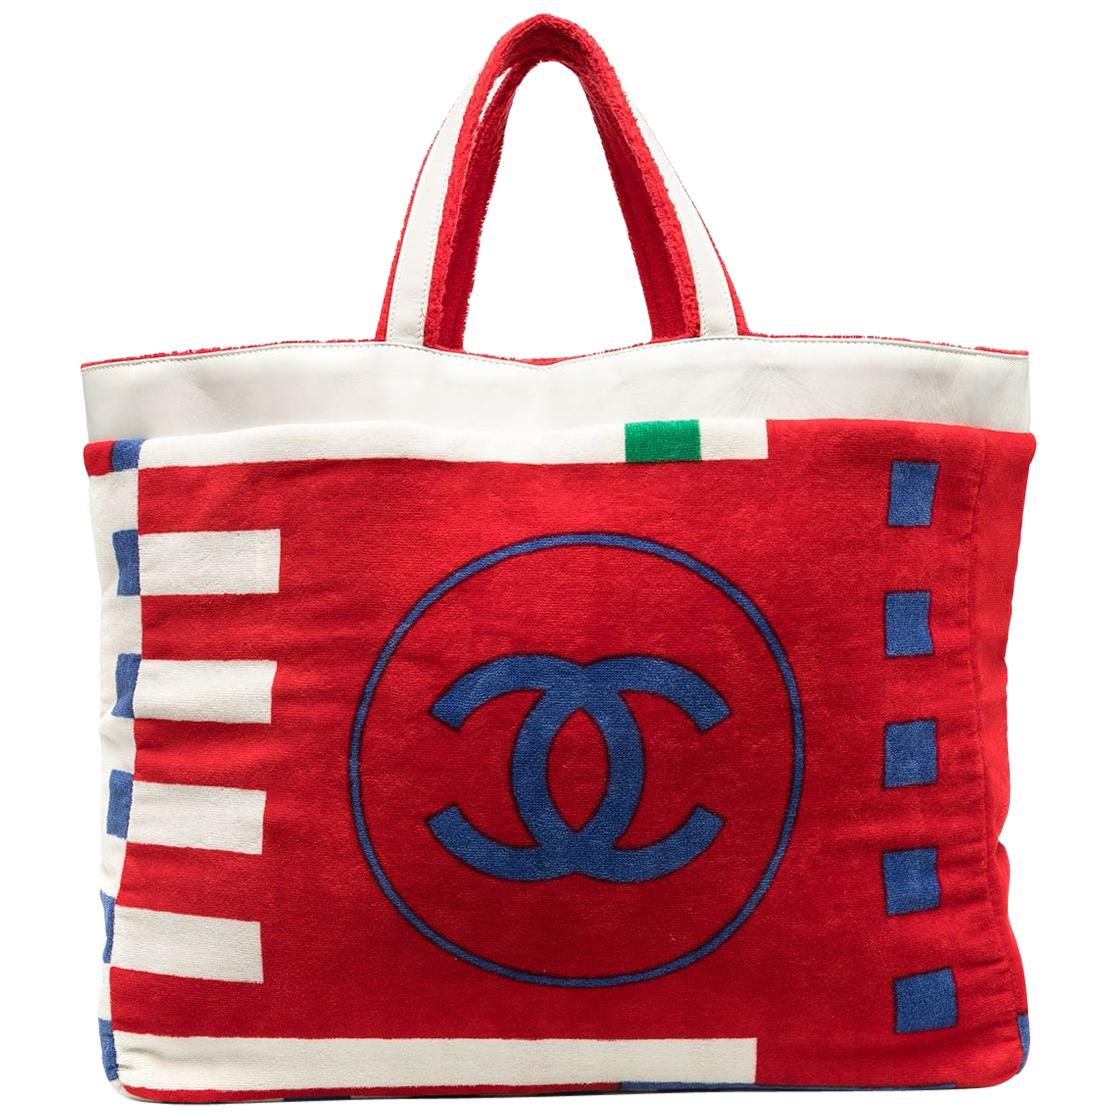 Chanel Vintage Jumbo Large CC Reversible Multicolor Lego Two Tone Red Beach Tote

white/blue/red
cotton
textured finish
logo print to the front
open top
two top handles
full lining

Made in Italy